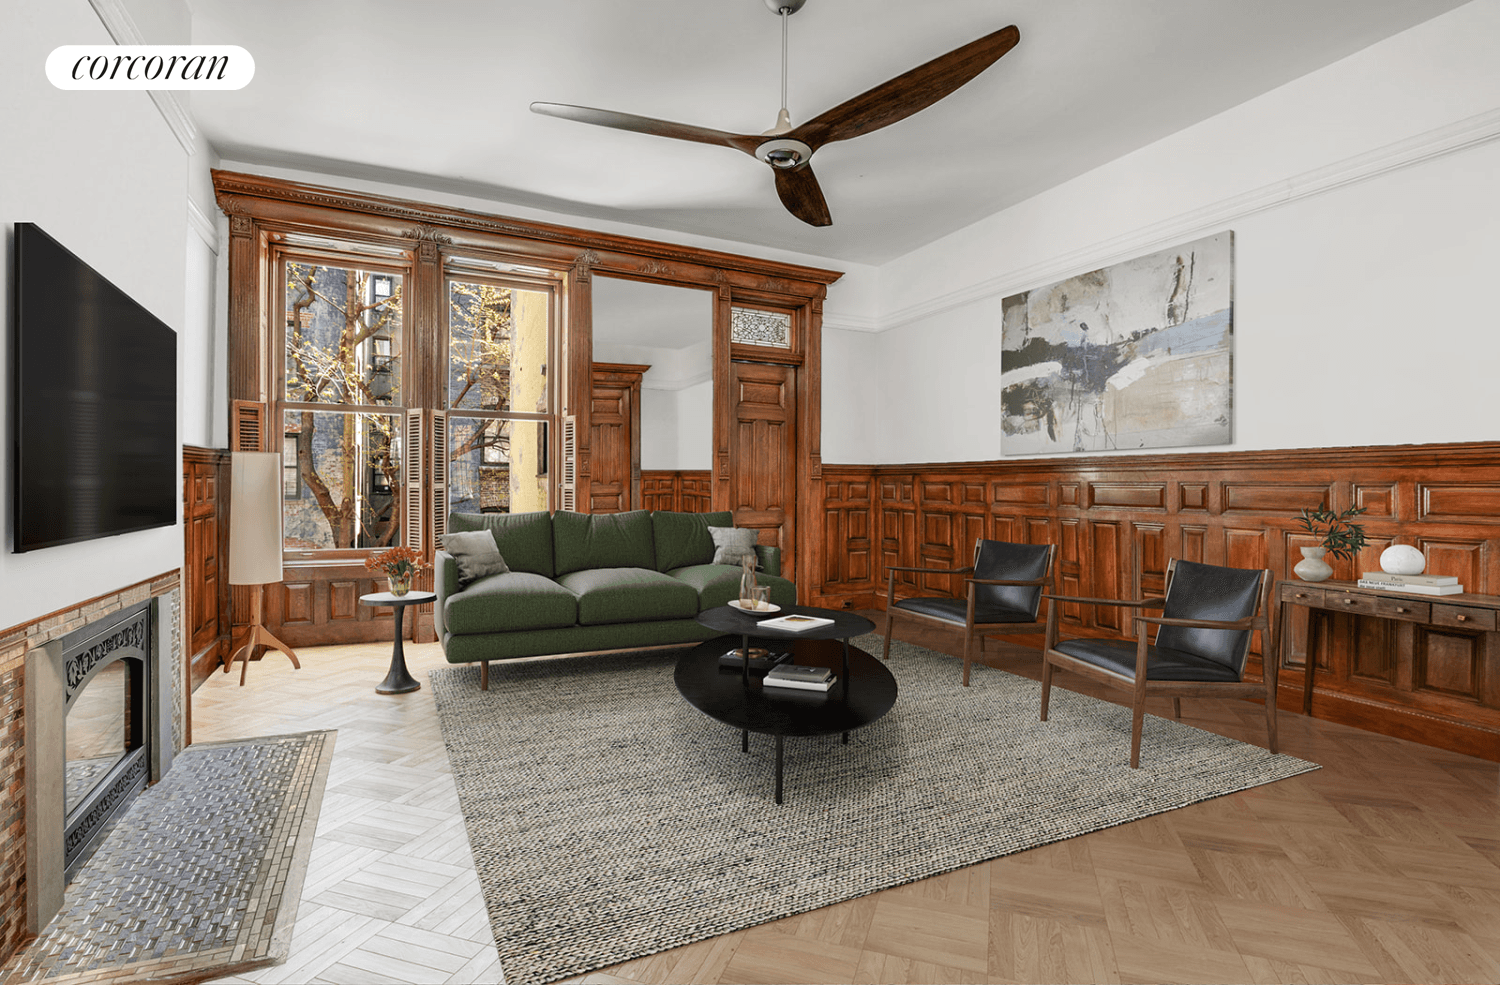 OLD world splendor meets modern in a 'smart' townhouse LOCATED ON THE PRETTIEST BLOCK IN HISTORIC SUGARHILL.